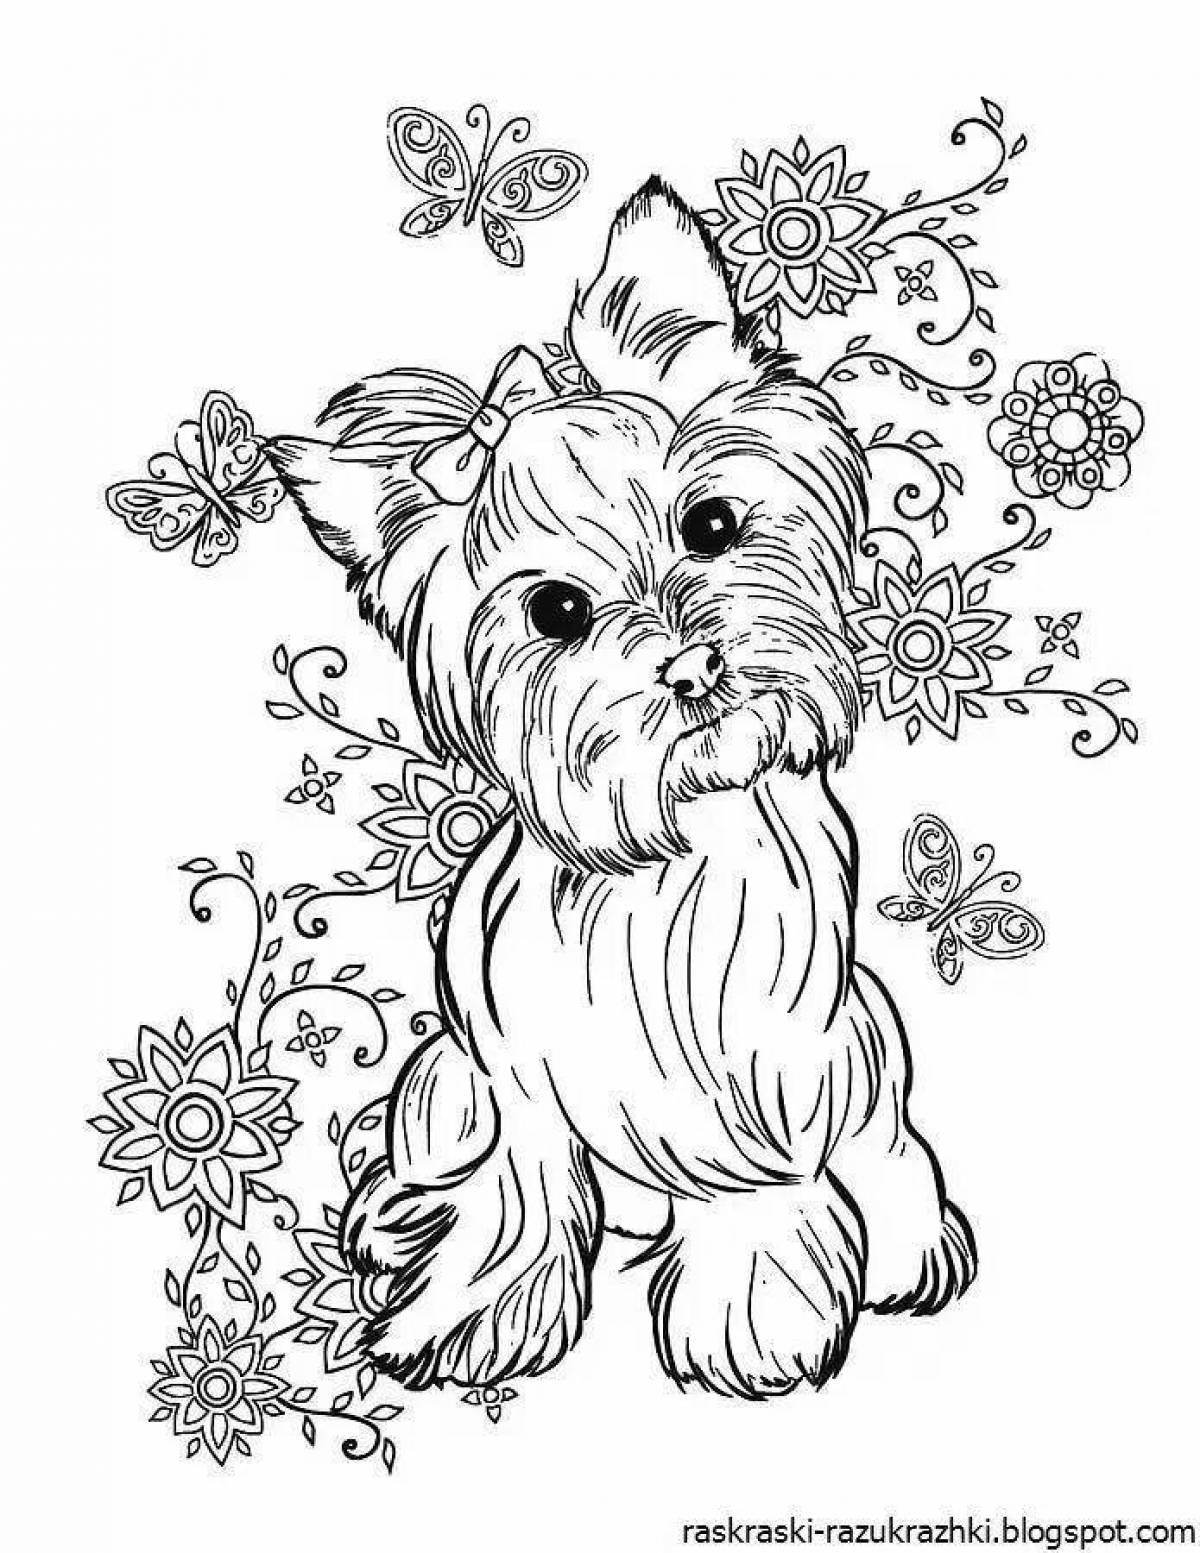 Joyful coloring for girls 9 years old - very beautiful animals